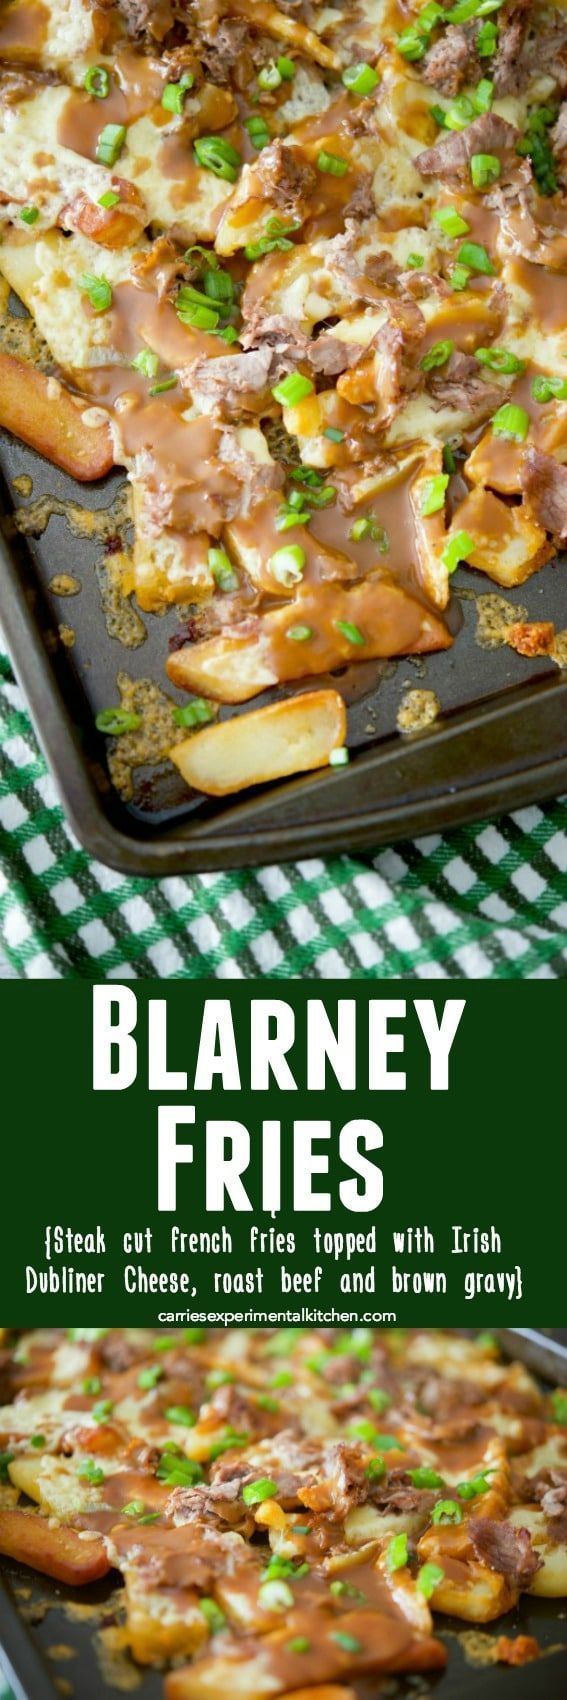 Blarney Fries -   25 shaved beef recipes
 ideas